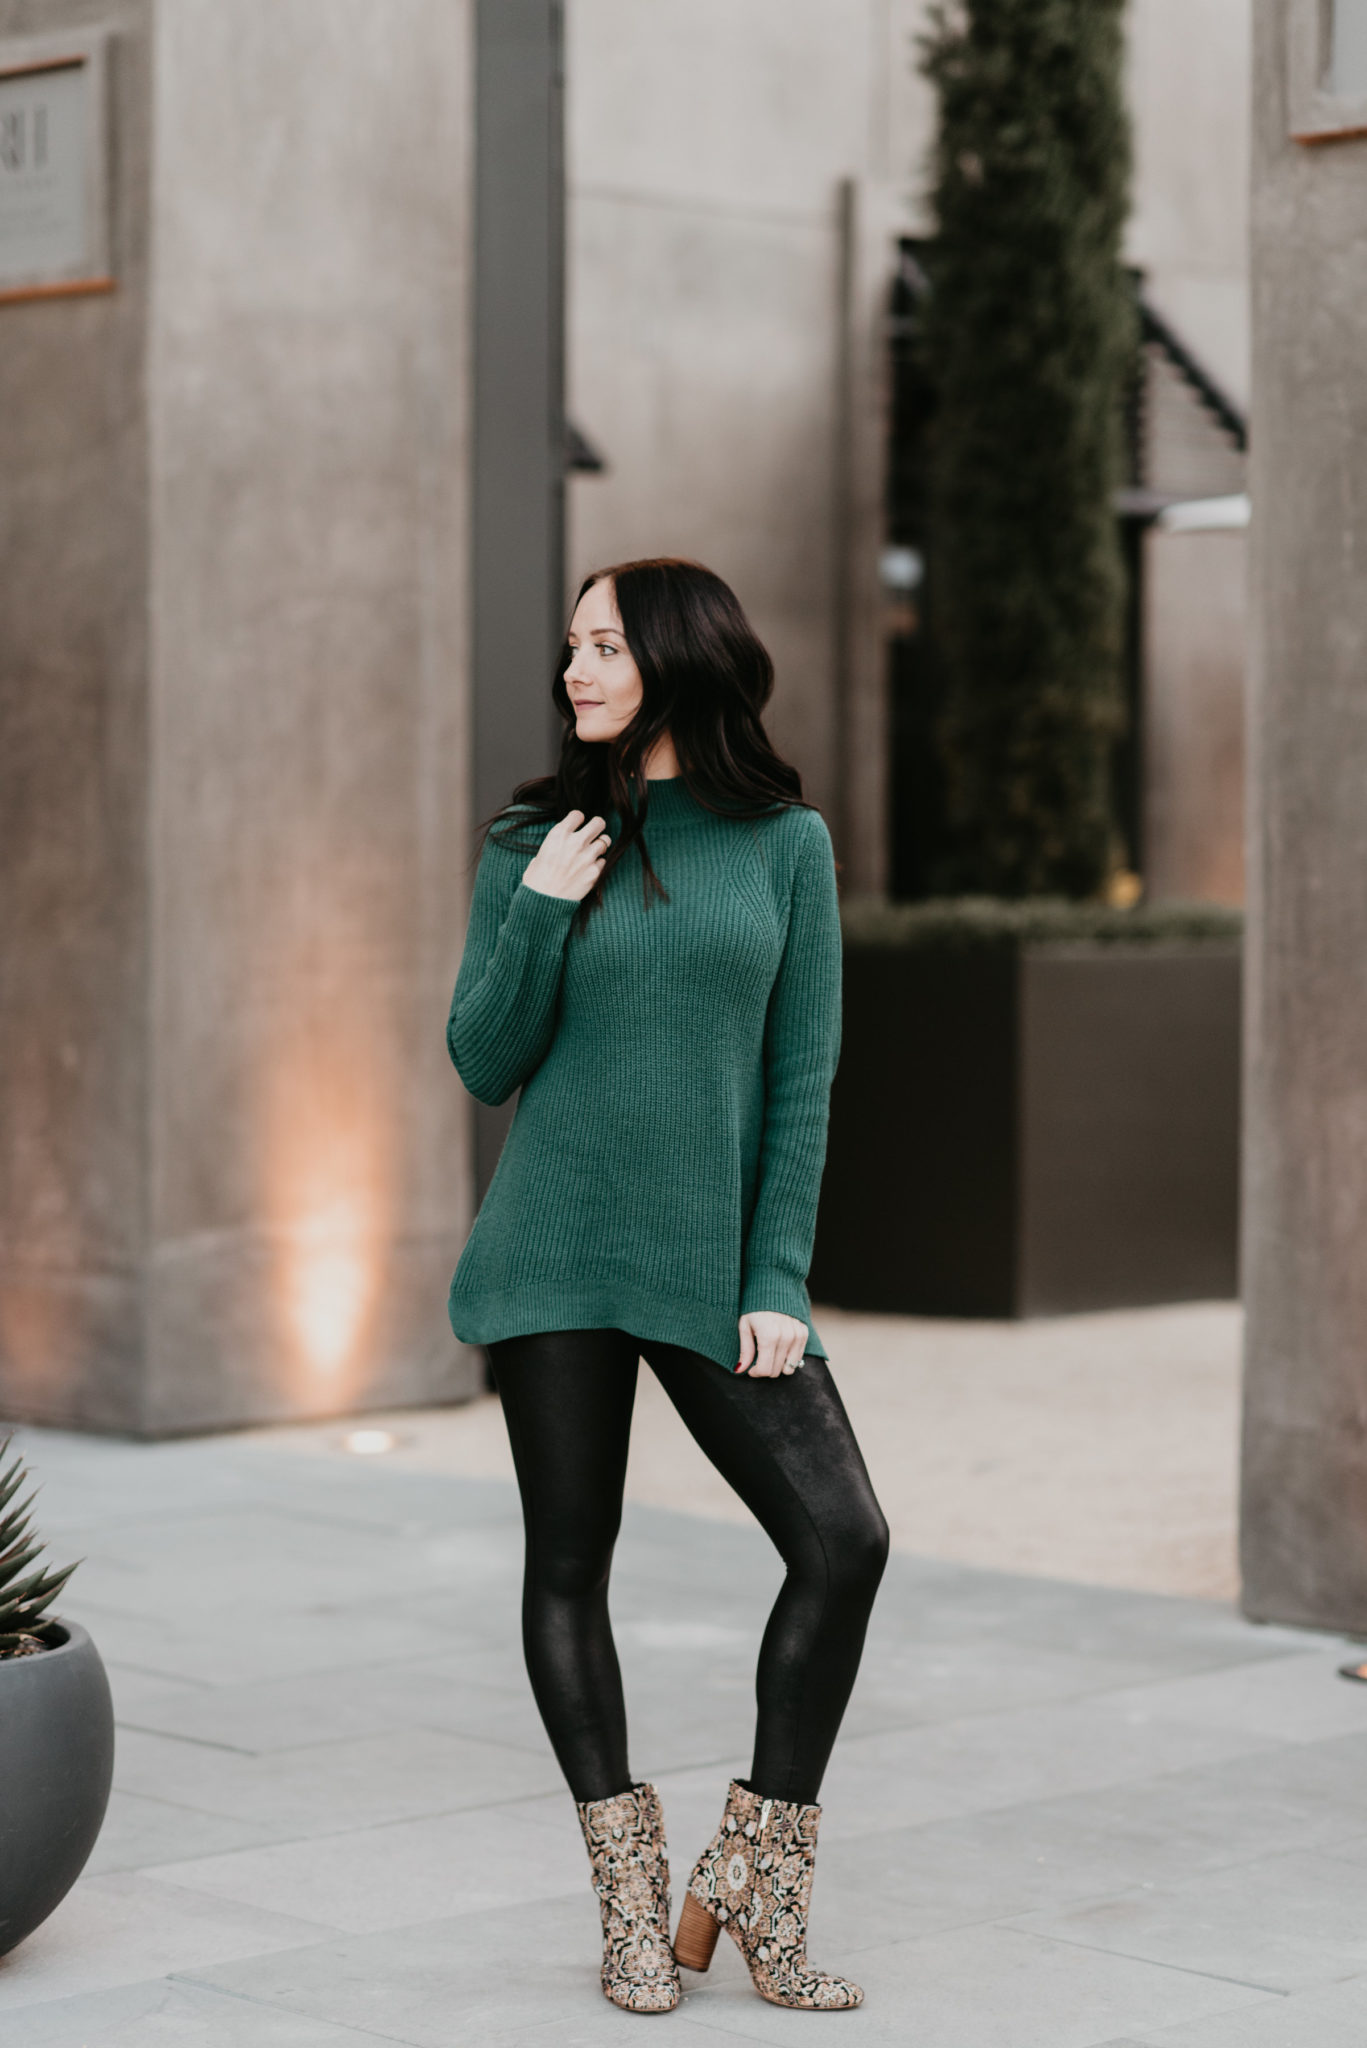 tunic sweater with black Spanx leggings and printed booties - My Favorite Winter Sweaters All Under $50 by popular Las Vegas style blogger Outfits & Outings